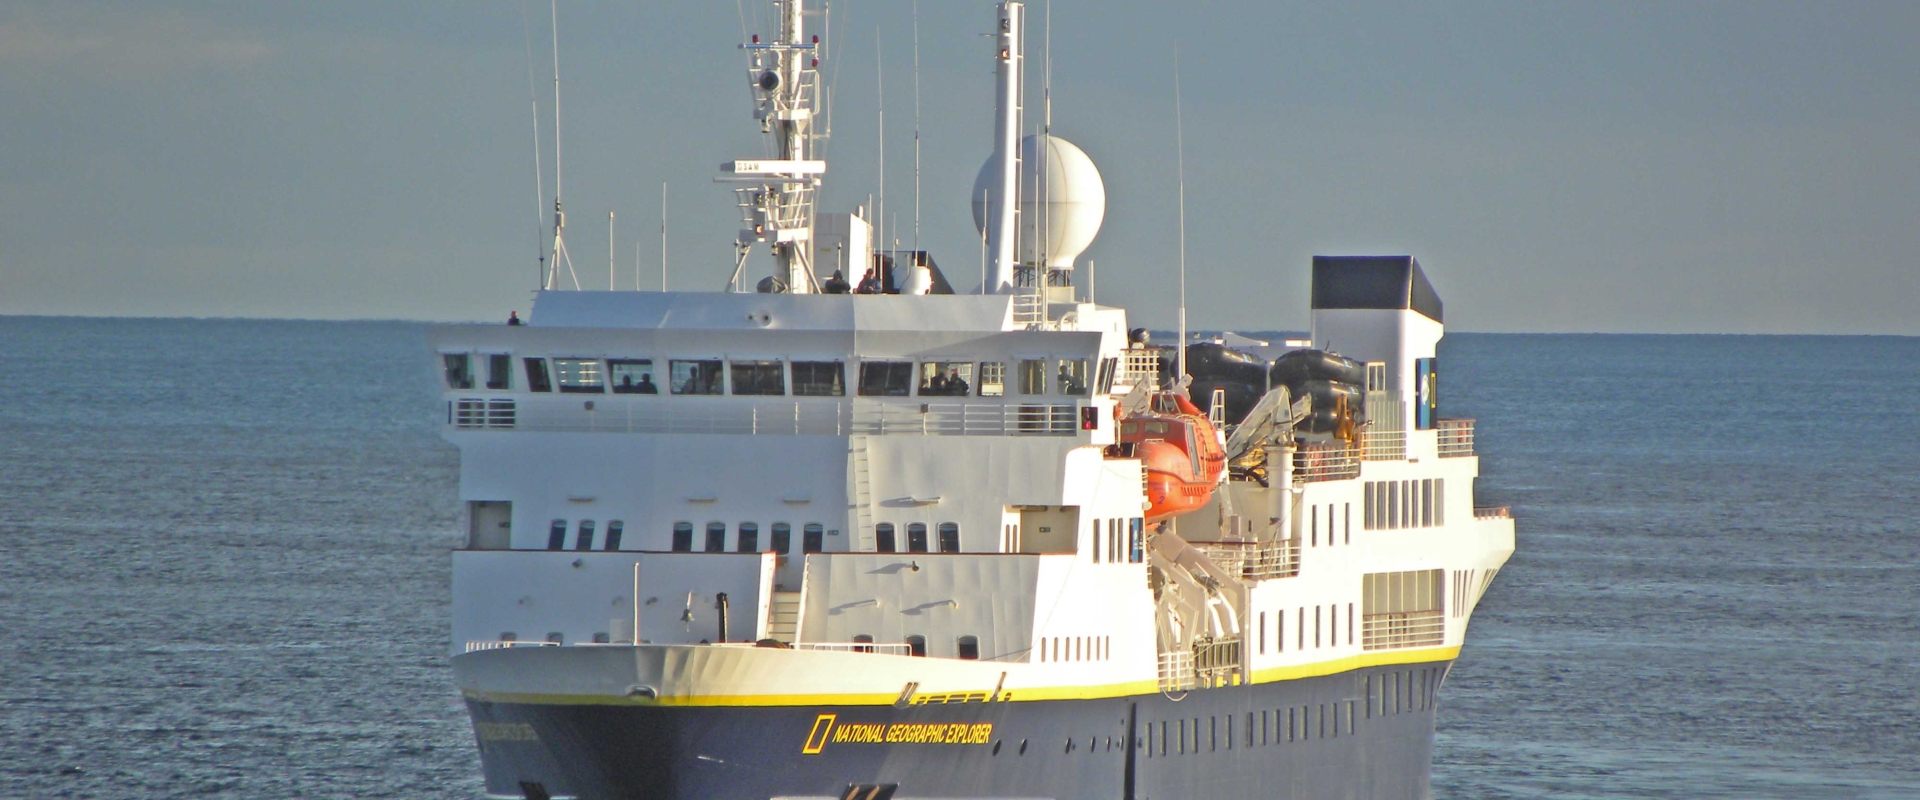 MS National Geograpic Explorer of Lindblad Expeditions